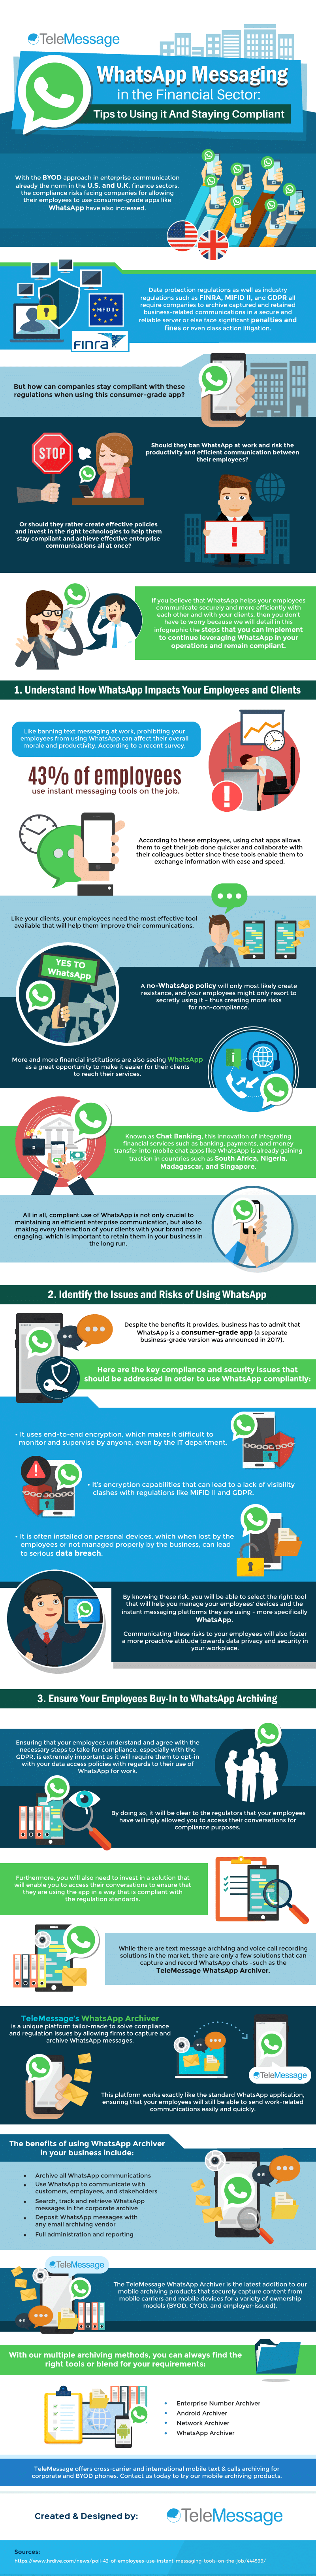 Using WhatsApp Messaging for Office-Related Work: Tips to Ensure Safety and Compliance - Infographic